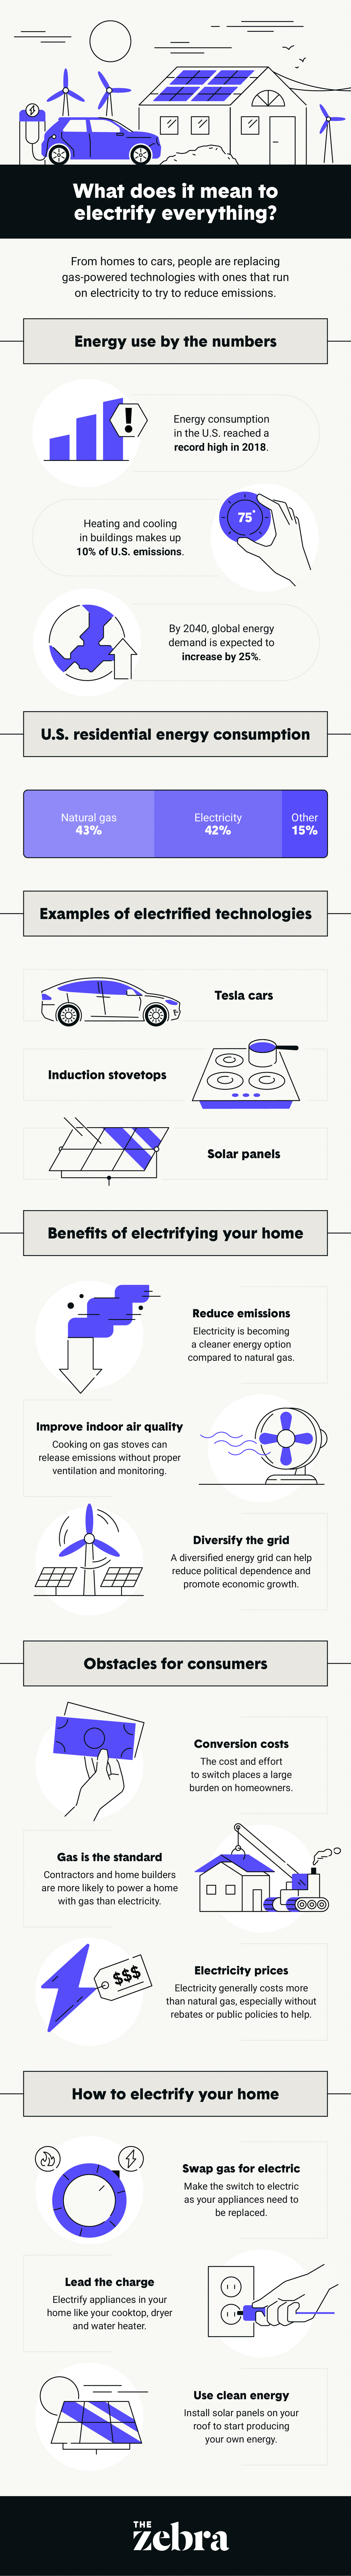 Infographic: What does it mean to electrify everything? Image: The Zebra.